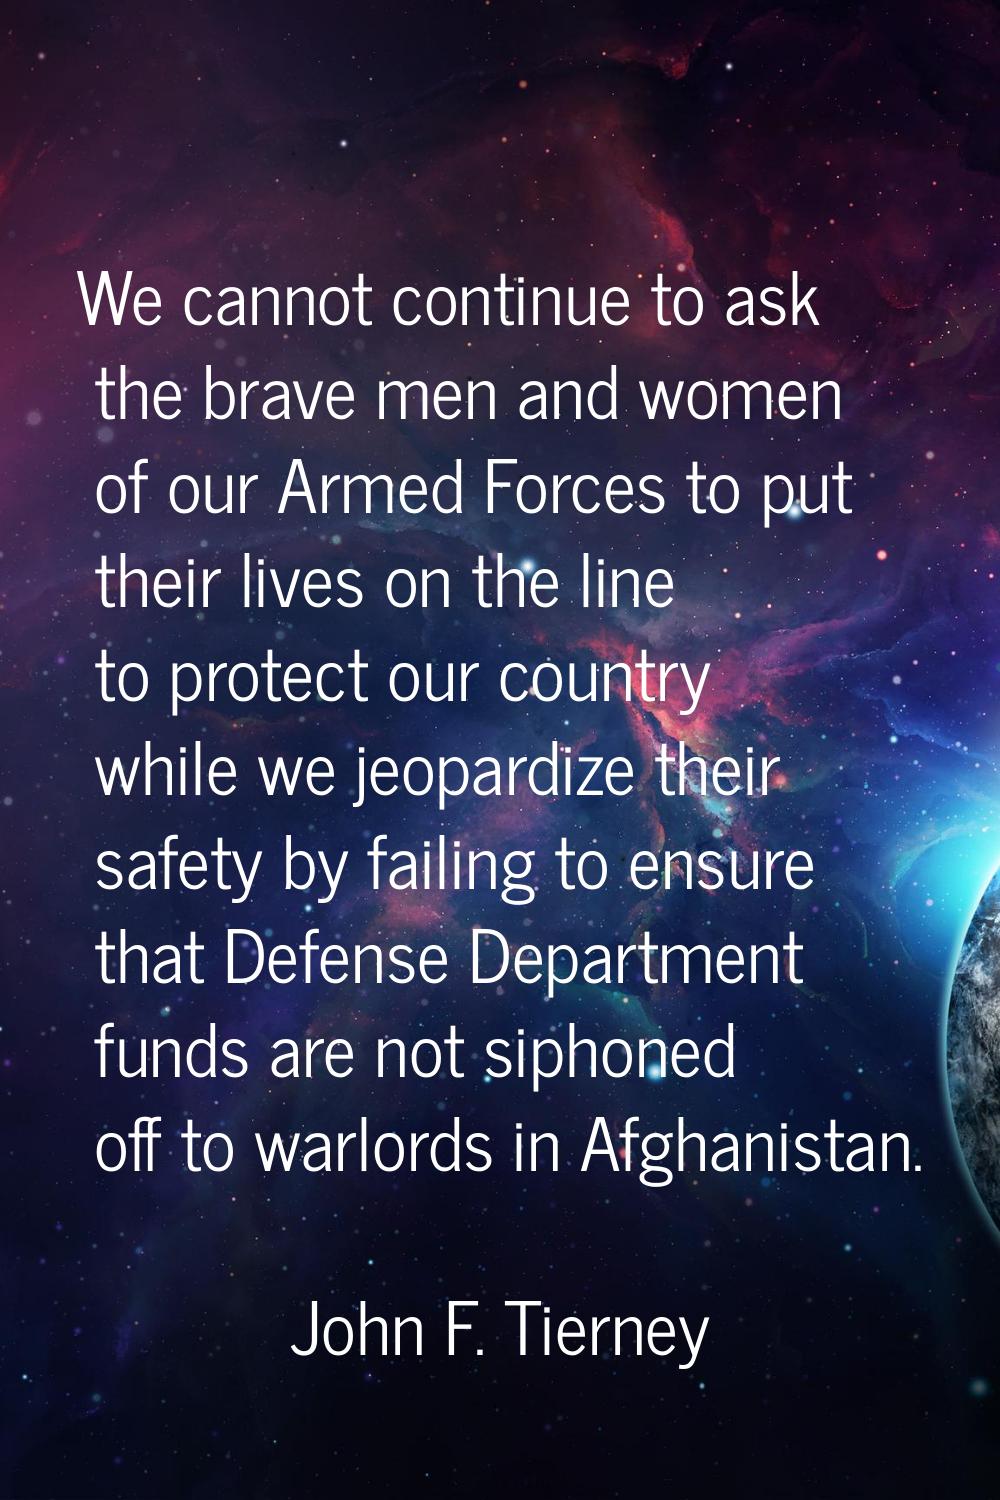 We cannot continue to ask the brave men and women of our Armed Forces to put their lives on the lin